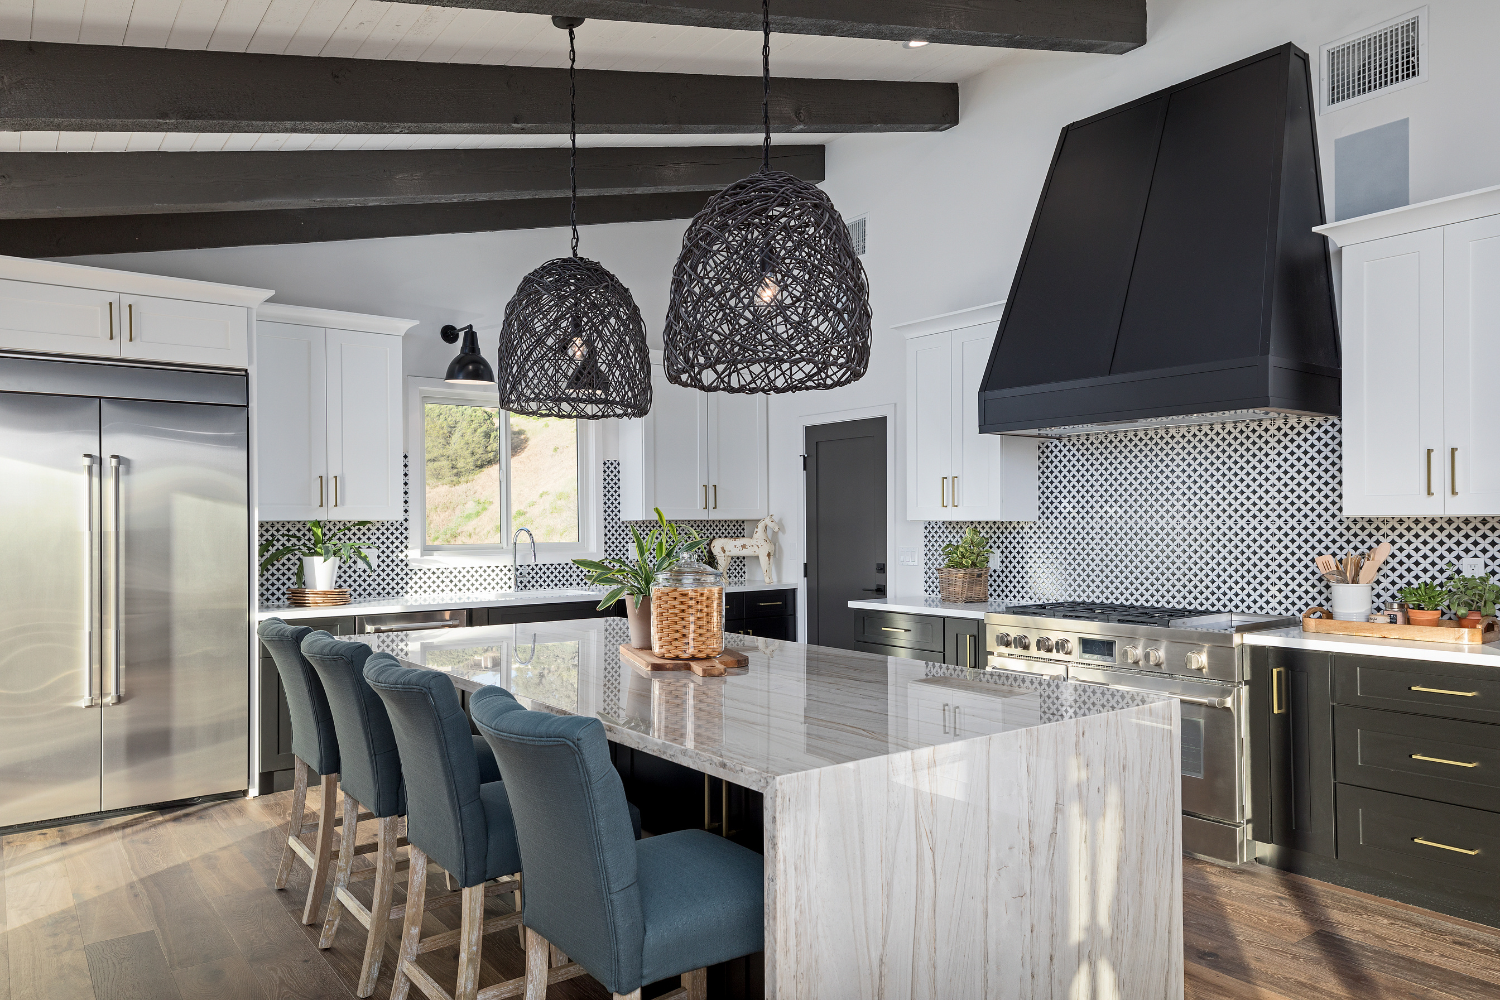 pamela-sandall-designs-los-angeles-ca-staging-frequently-asked-questions-modern-kitchen-with-ornate-pendants-over-the-kitchen-island